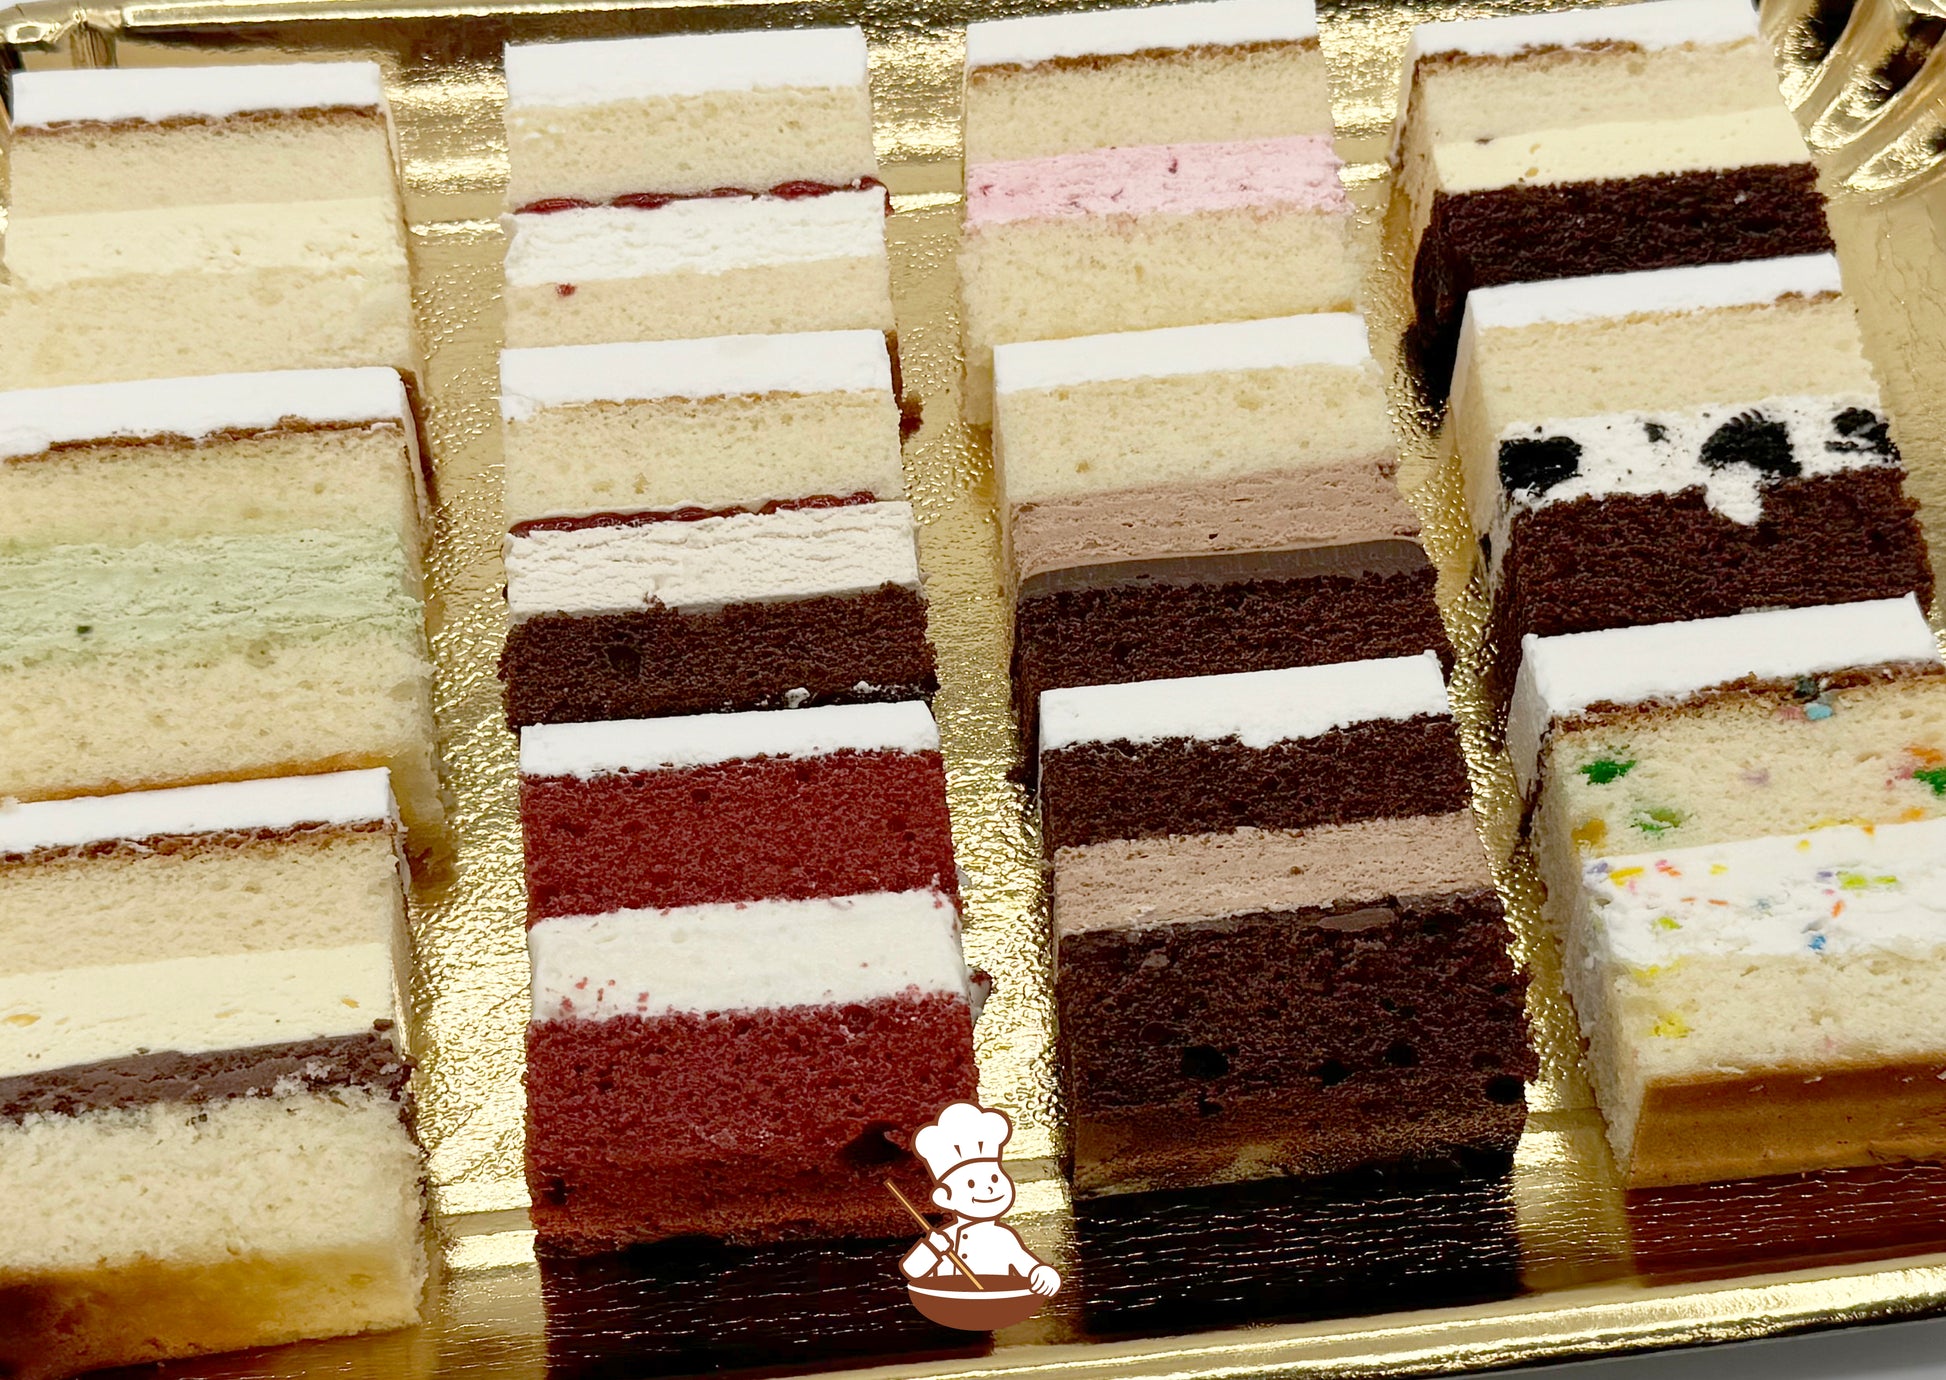 12 Cake Sample Slices arranged in a 4 by 4 grid on a gold colored tray. Slices are various flavors & are numbered 1 through 12. 1 is in the top left corner & 12 is bottom right.